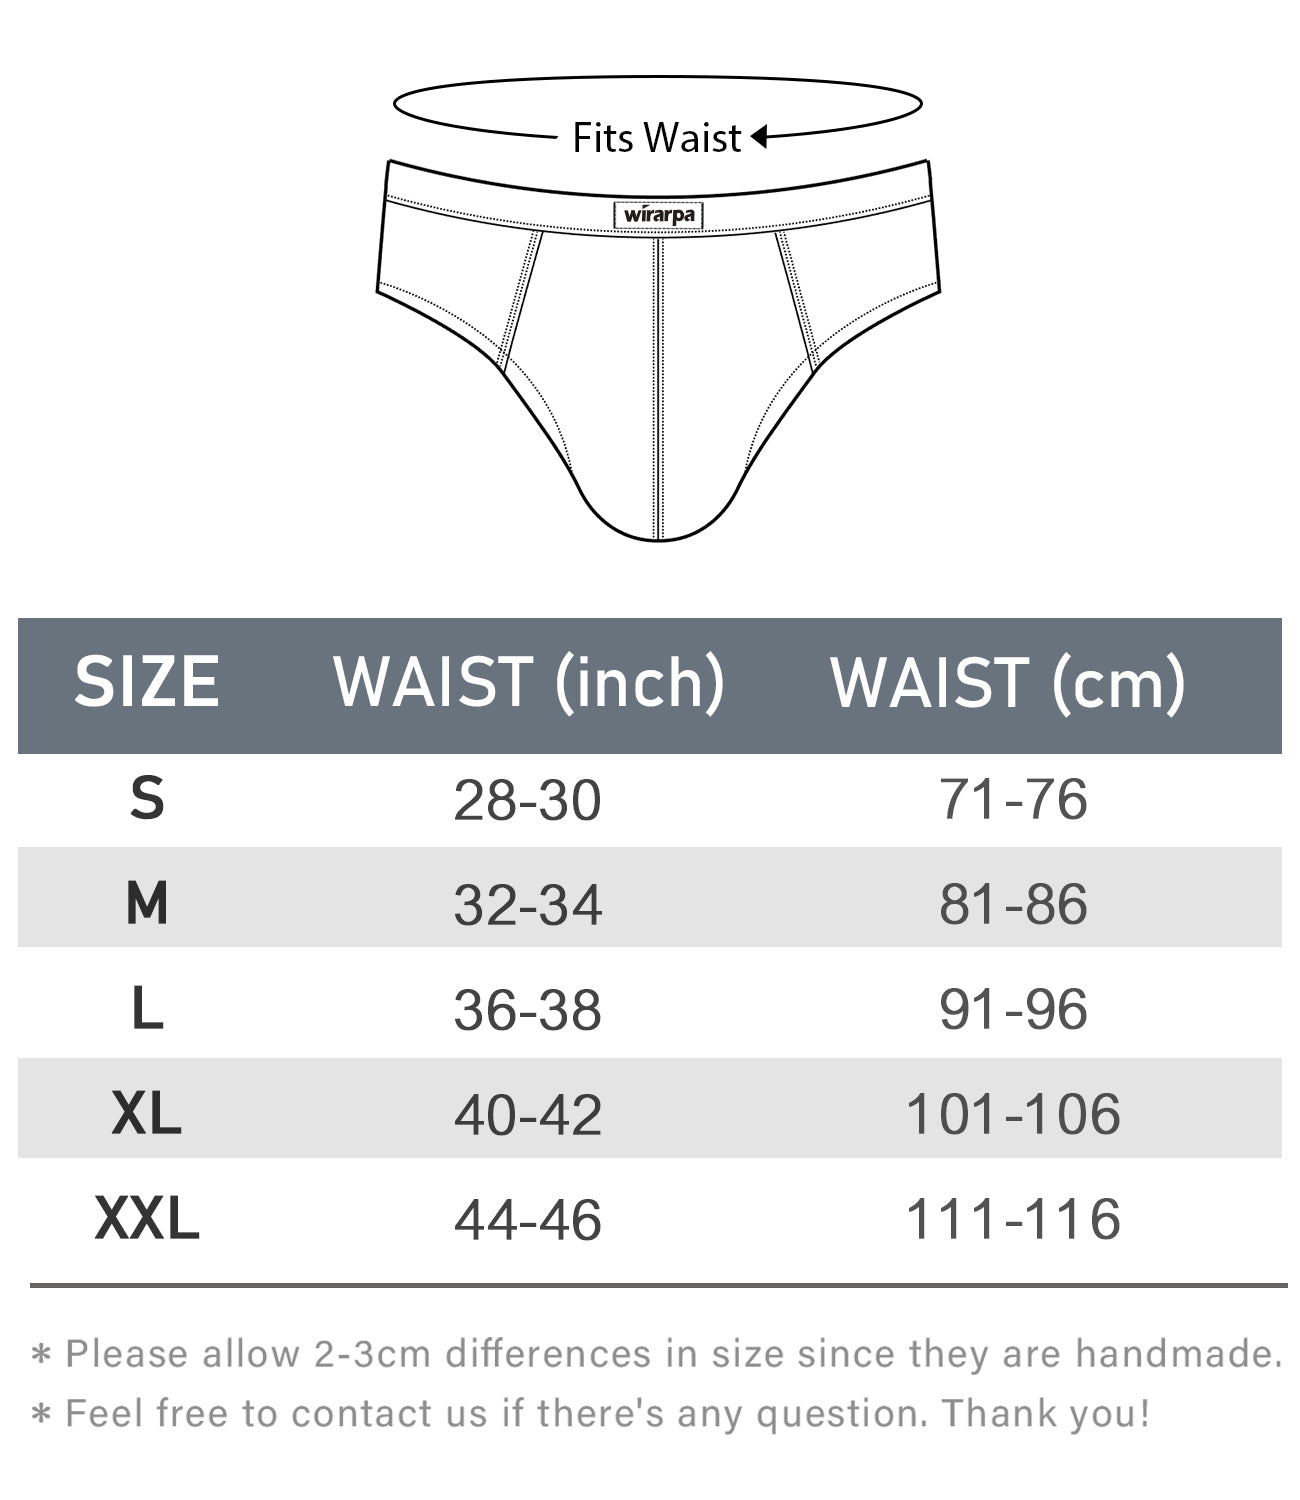 wirarpa Men’s No Fly Covered Waistband 100 Cotton Briefs 4 Pack